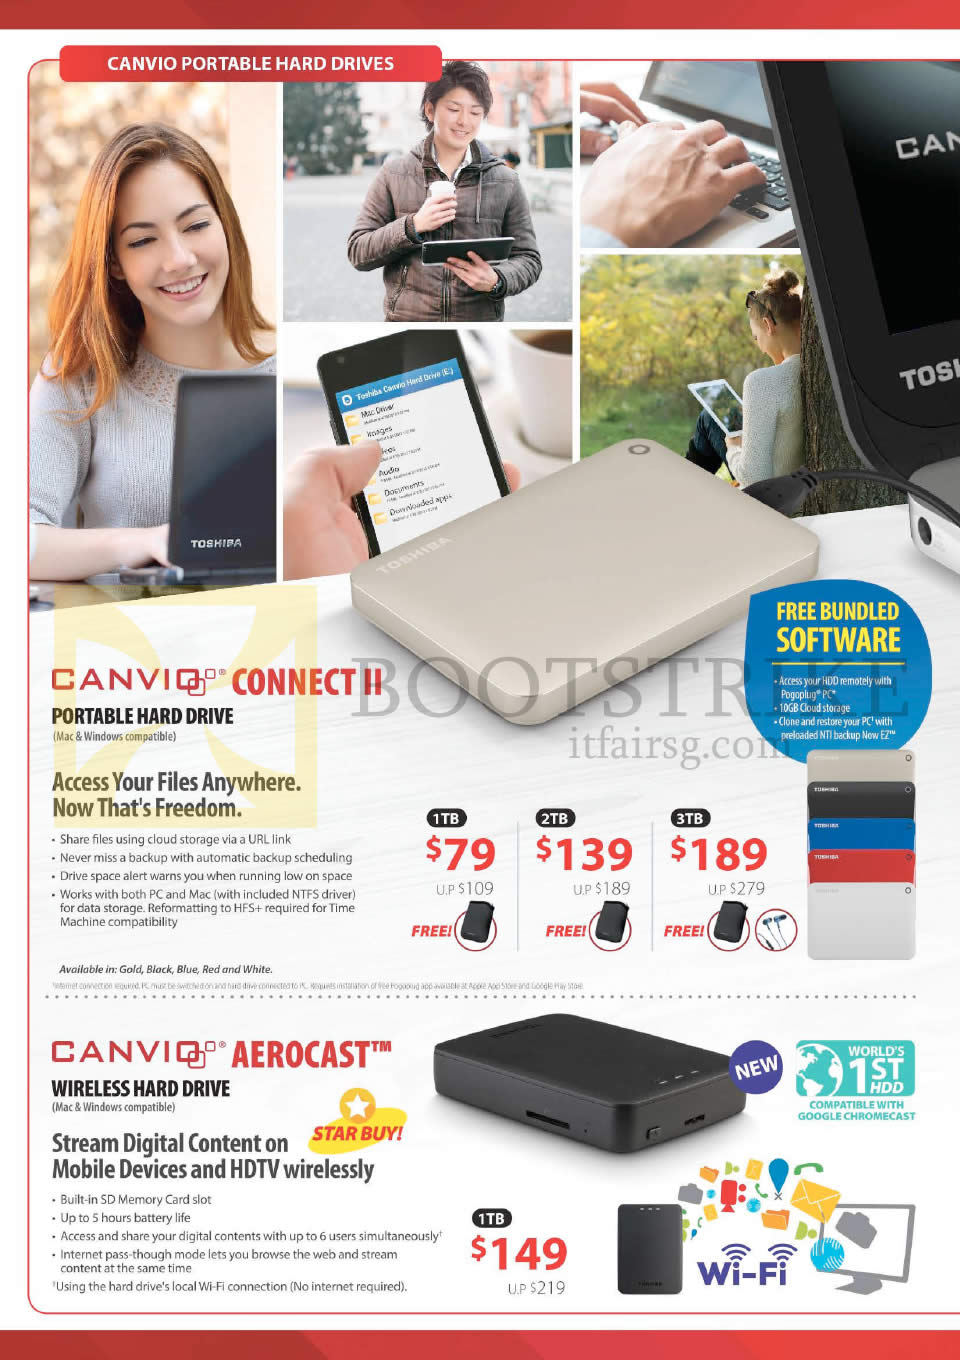 IT SHOW 2016 price list image brochure of Toshiba Portable Hard Drives Canvio Connect II Portable Hard Drive, Aerocast Wireless Hard Drive, 1TB 2TB 3TB